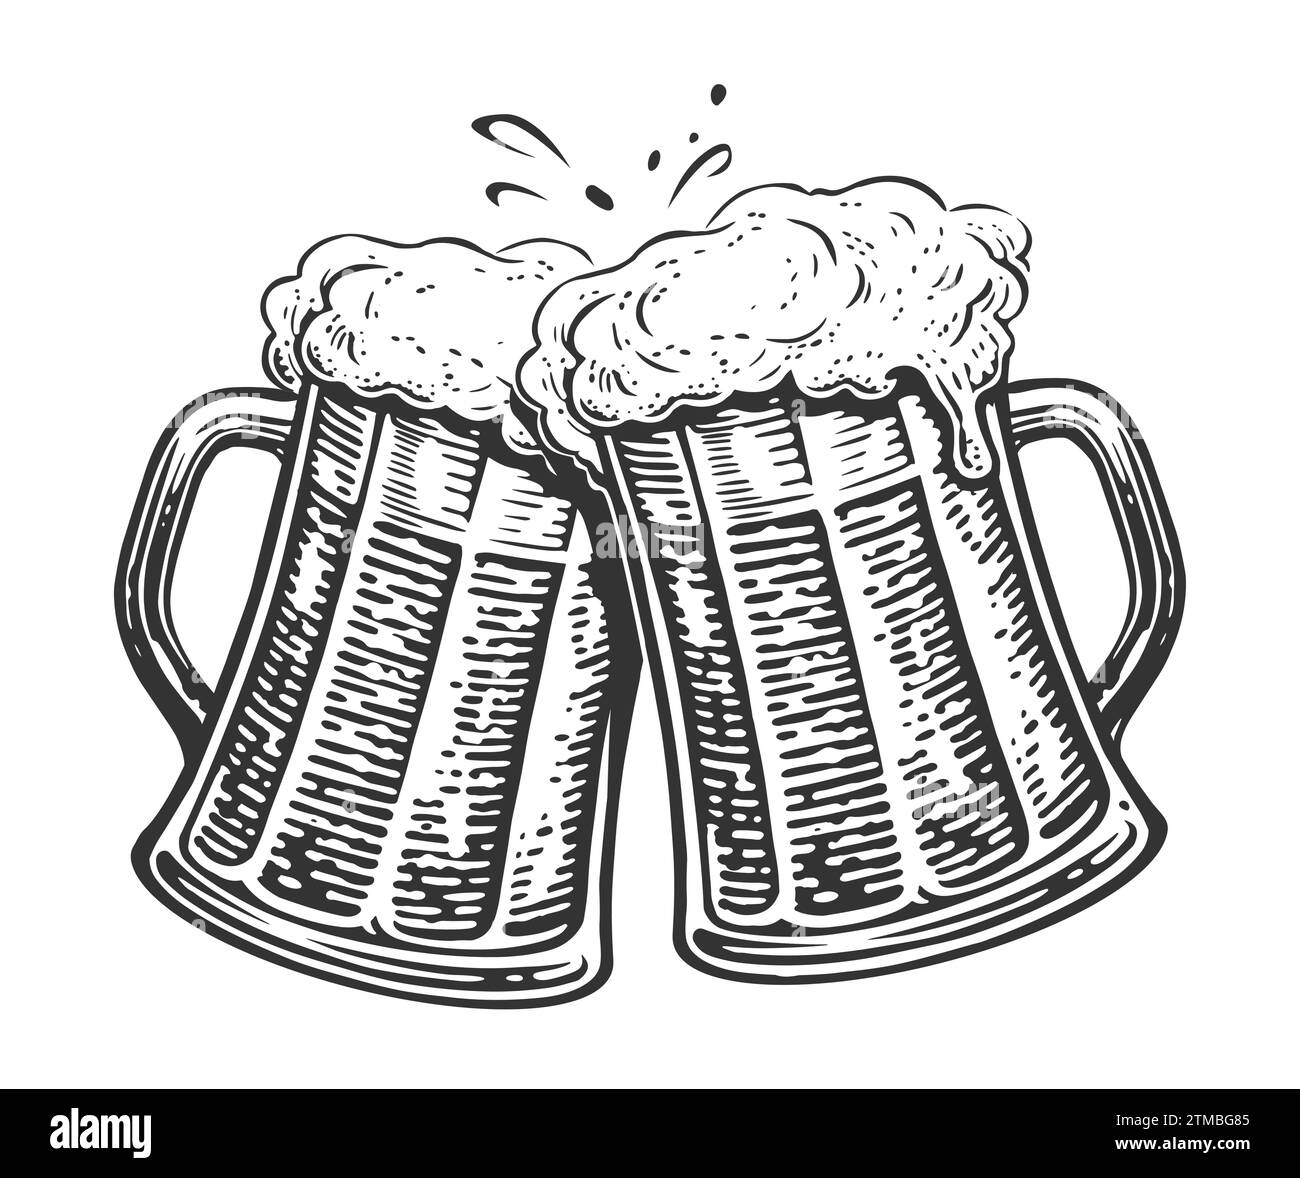 Two toasting beer mugs. Clinking glass tankards full of beer and splashed foam. Cheers, illustration Stock Vector